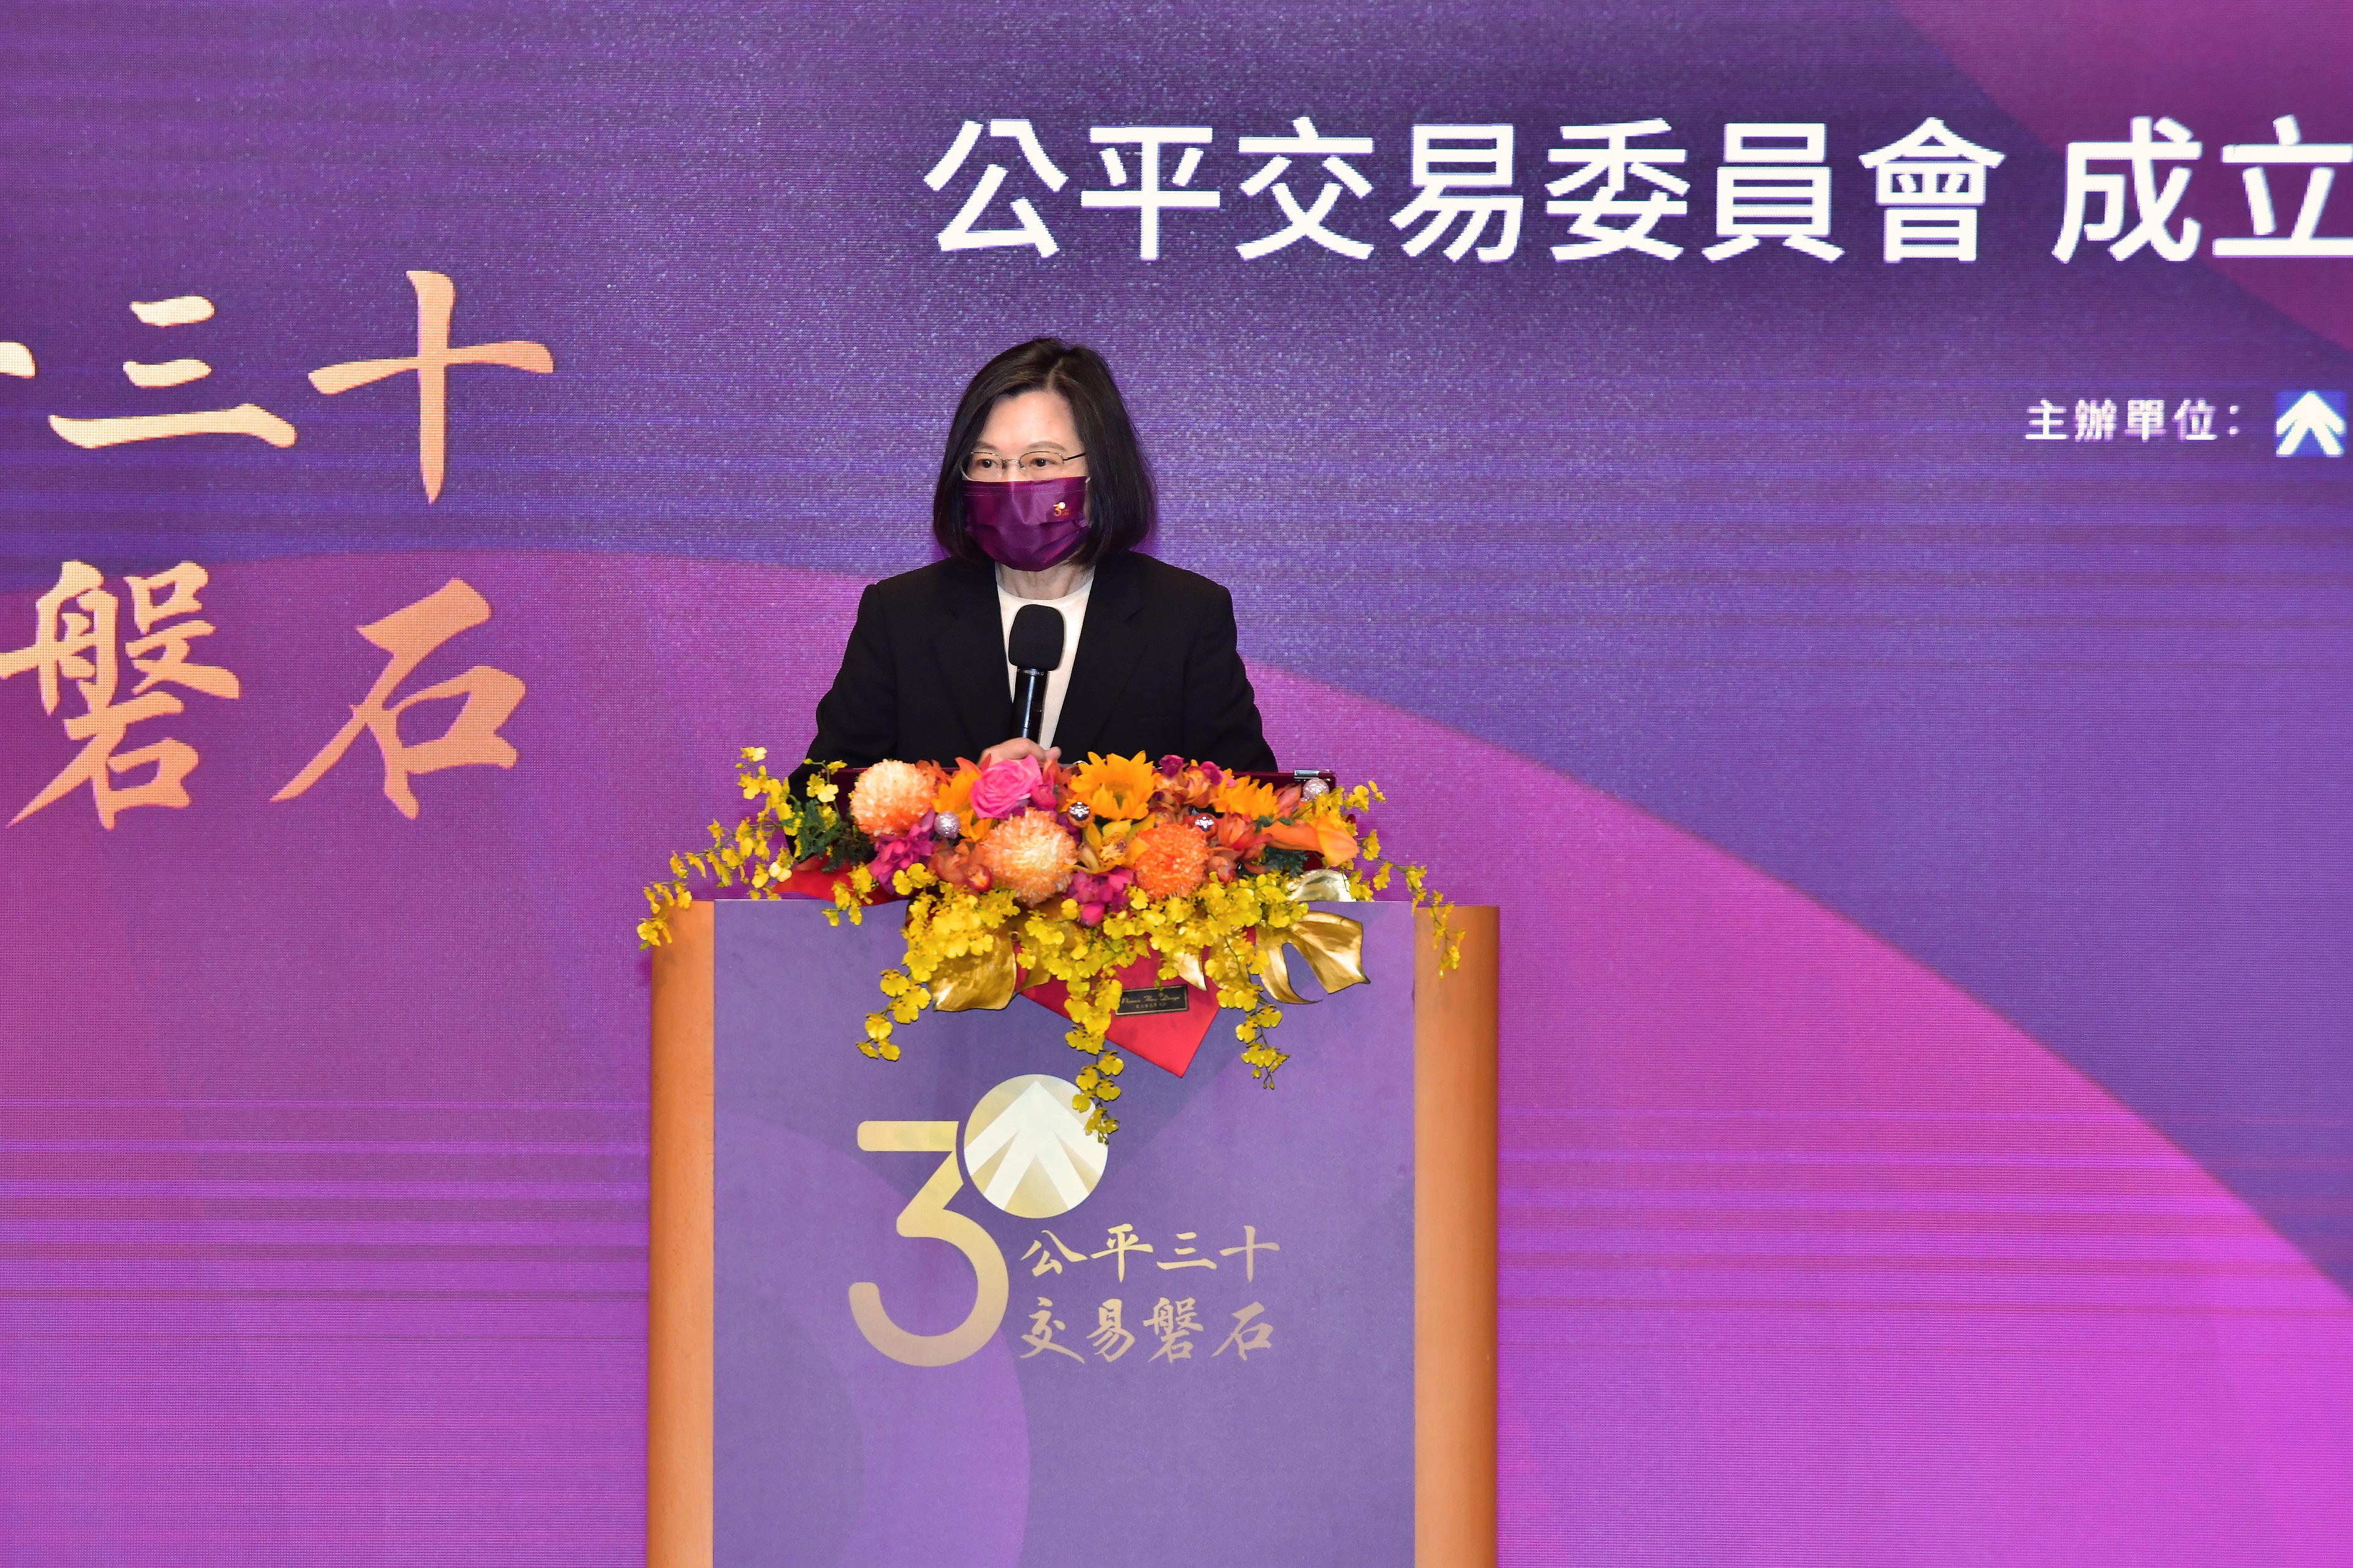 President Tsai Ing-wen giving a speech during the FTC's 30th Anniversary